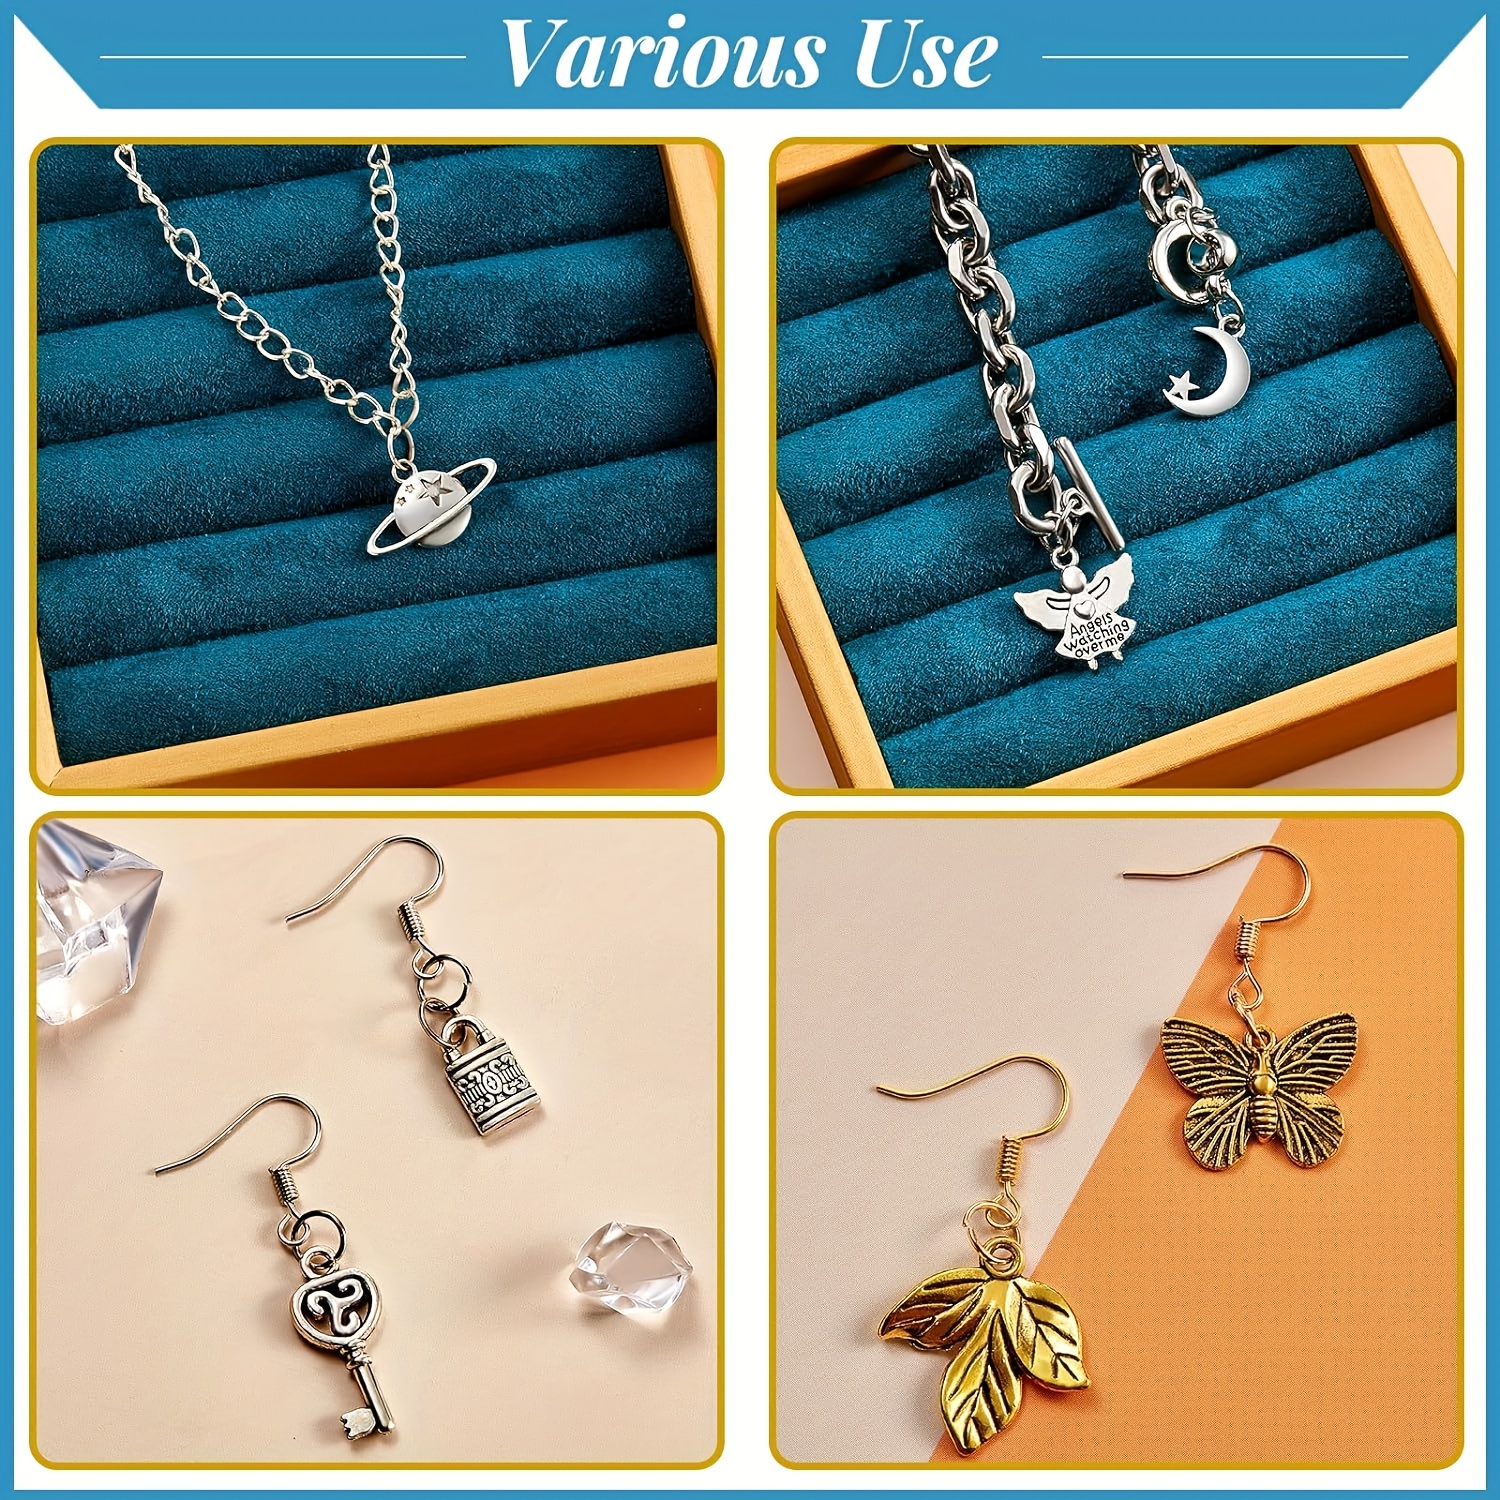 Artistic and Quirky Bulk Charms Wholesale at Lowest Prices 